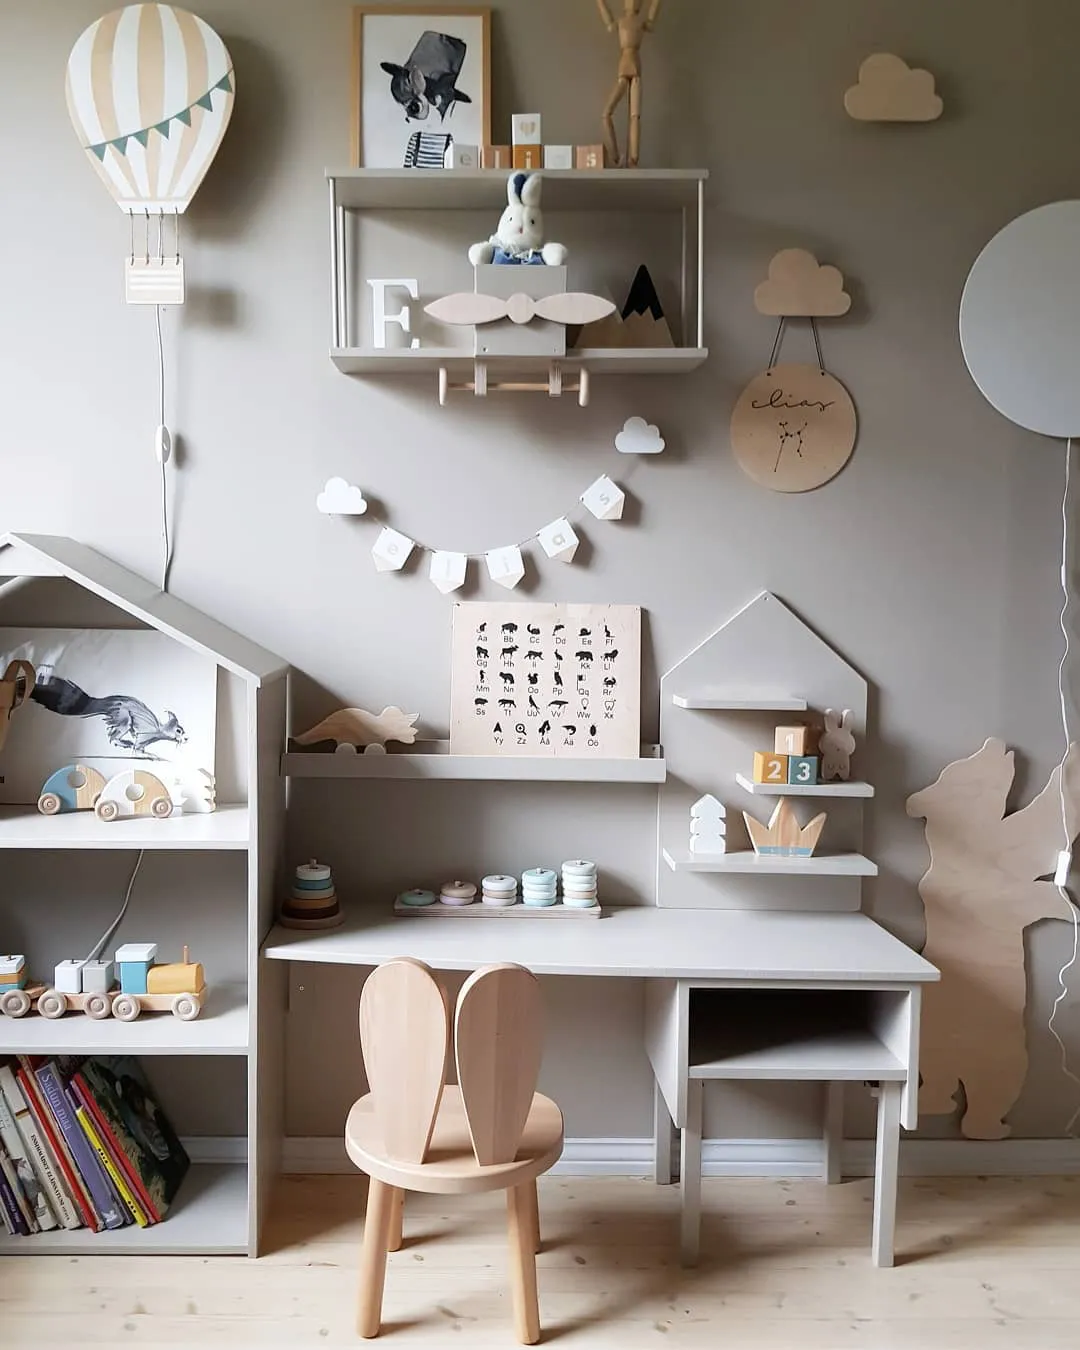 Greige kidsroom with wooden toys - PLAN